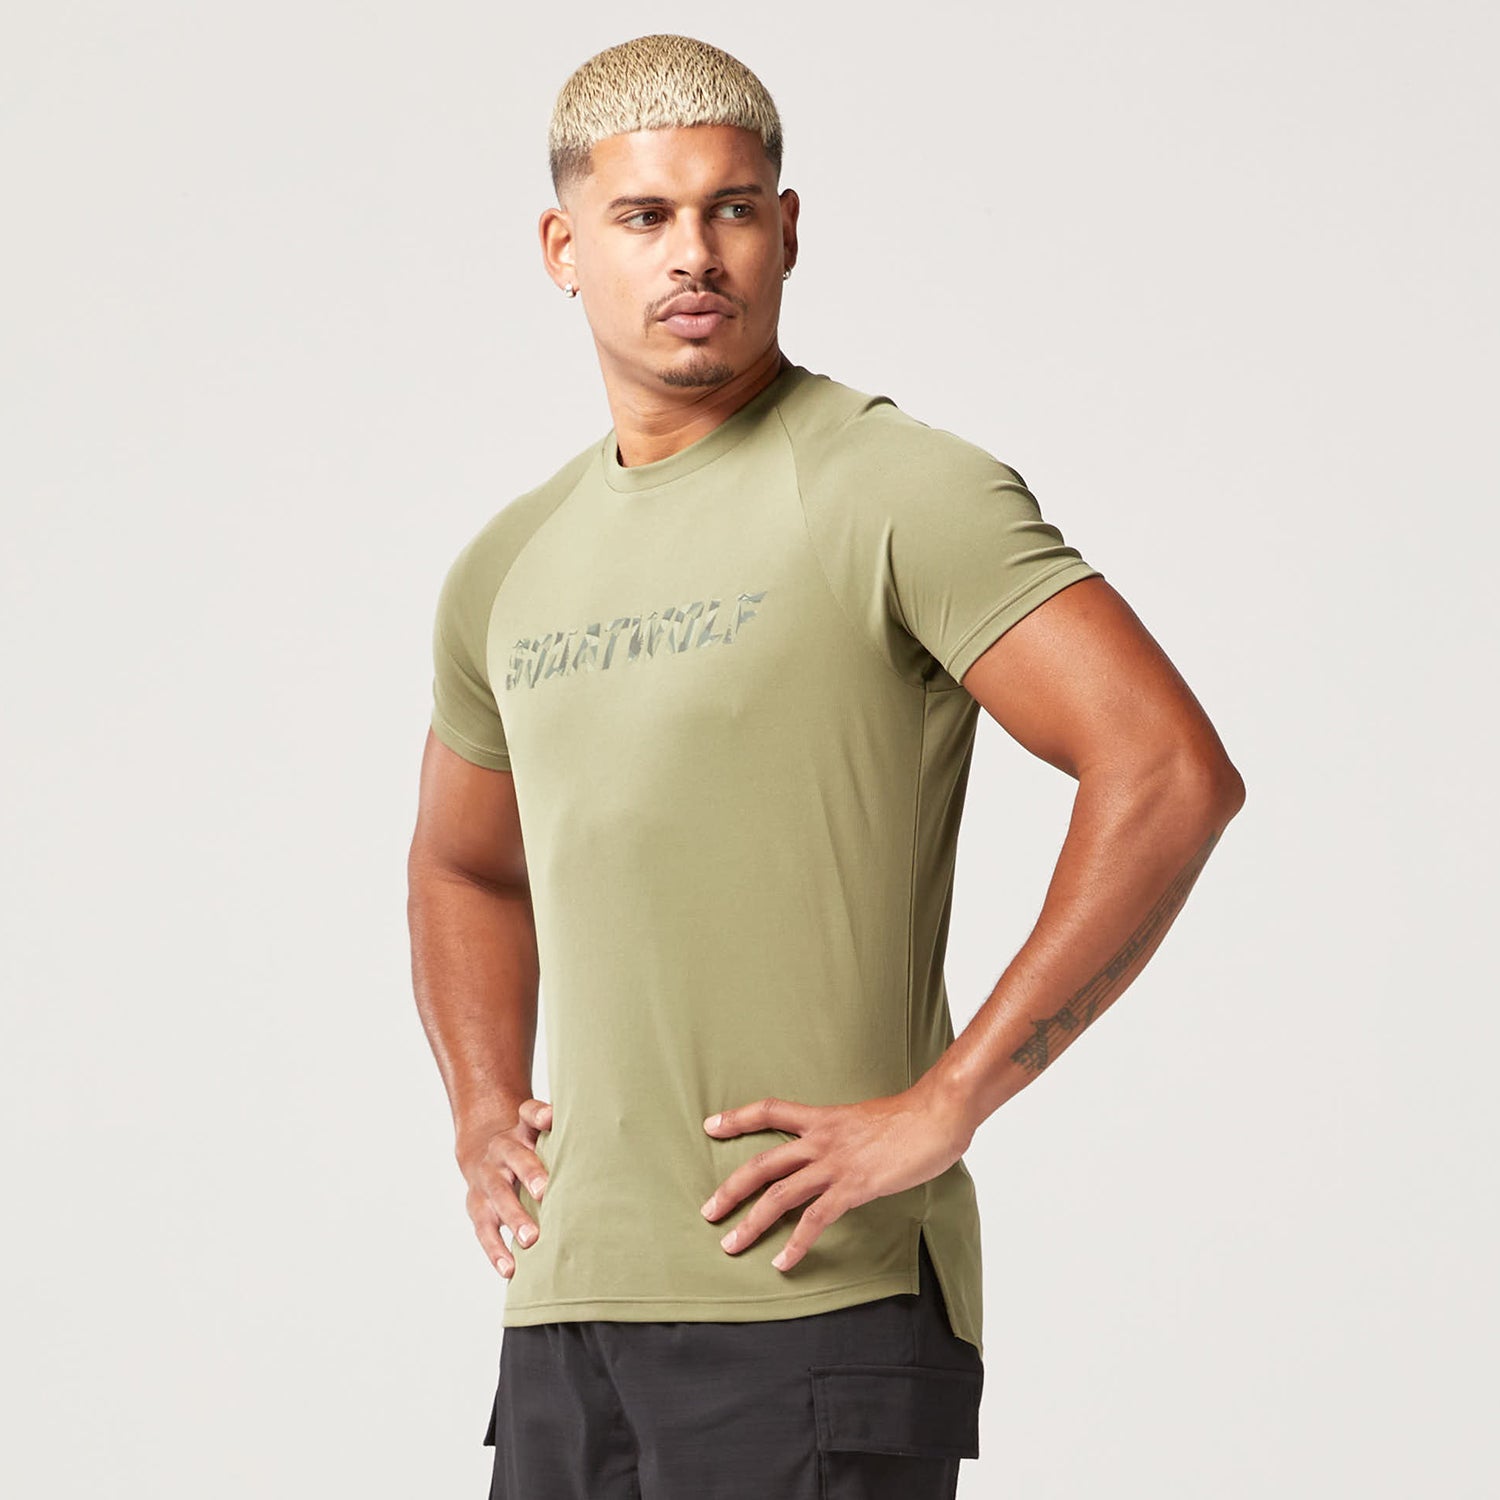 squatwolf-gym-wear-code-muscle-tee-green-workout-shirts-for-men